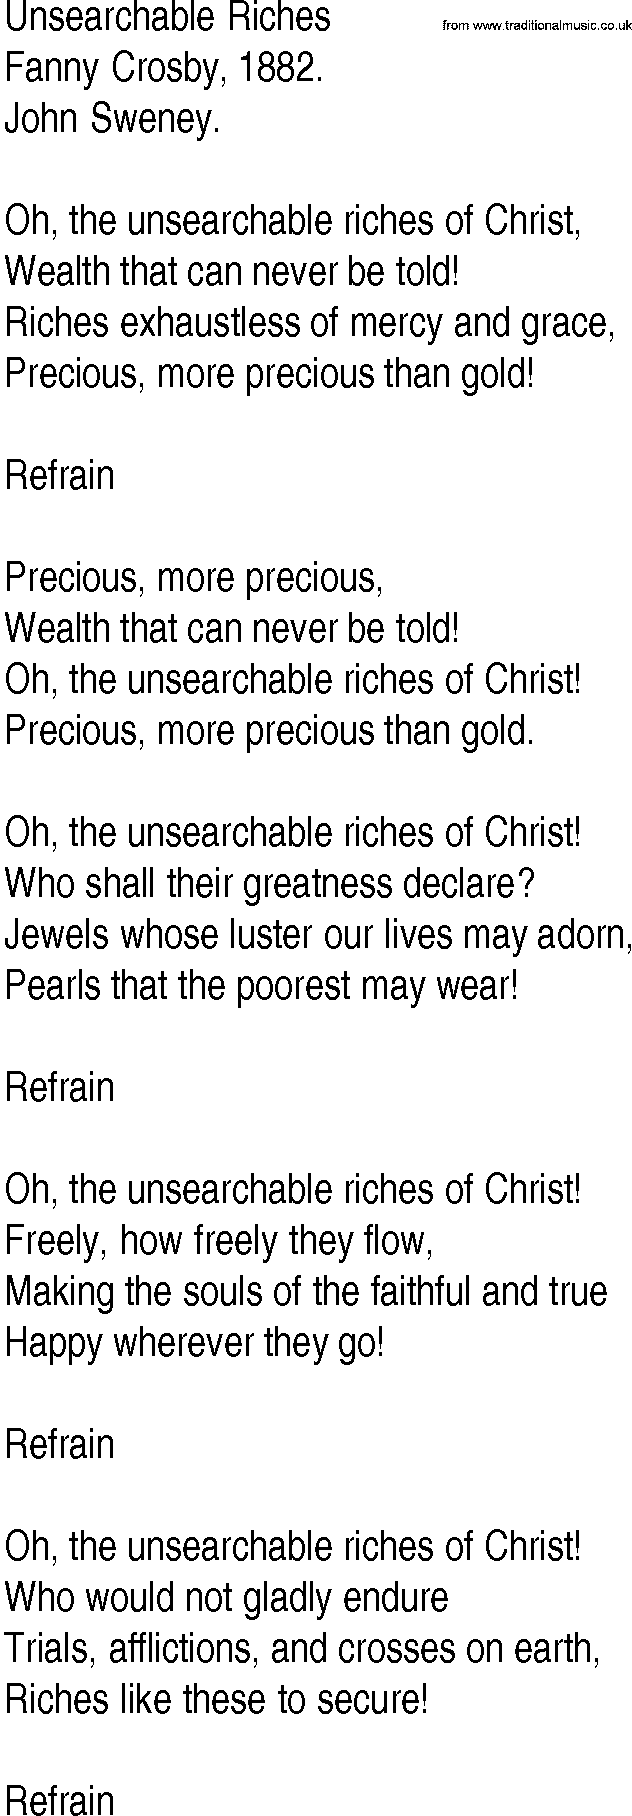 Hymn and Gospel Song: Unsearchable Riches by Fanny Crosby lyrics